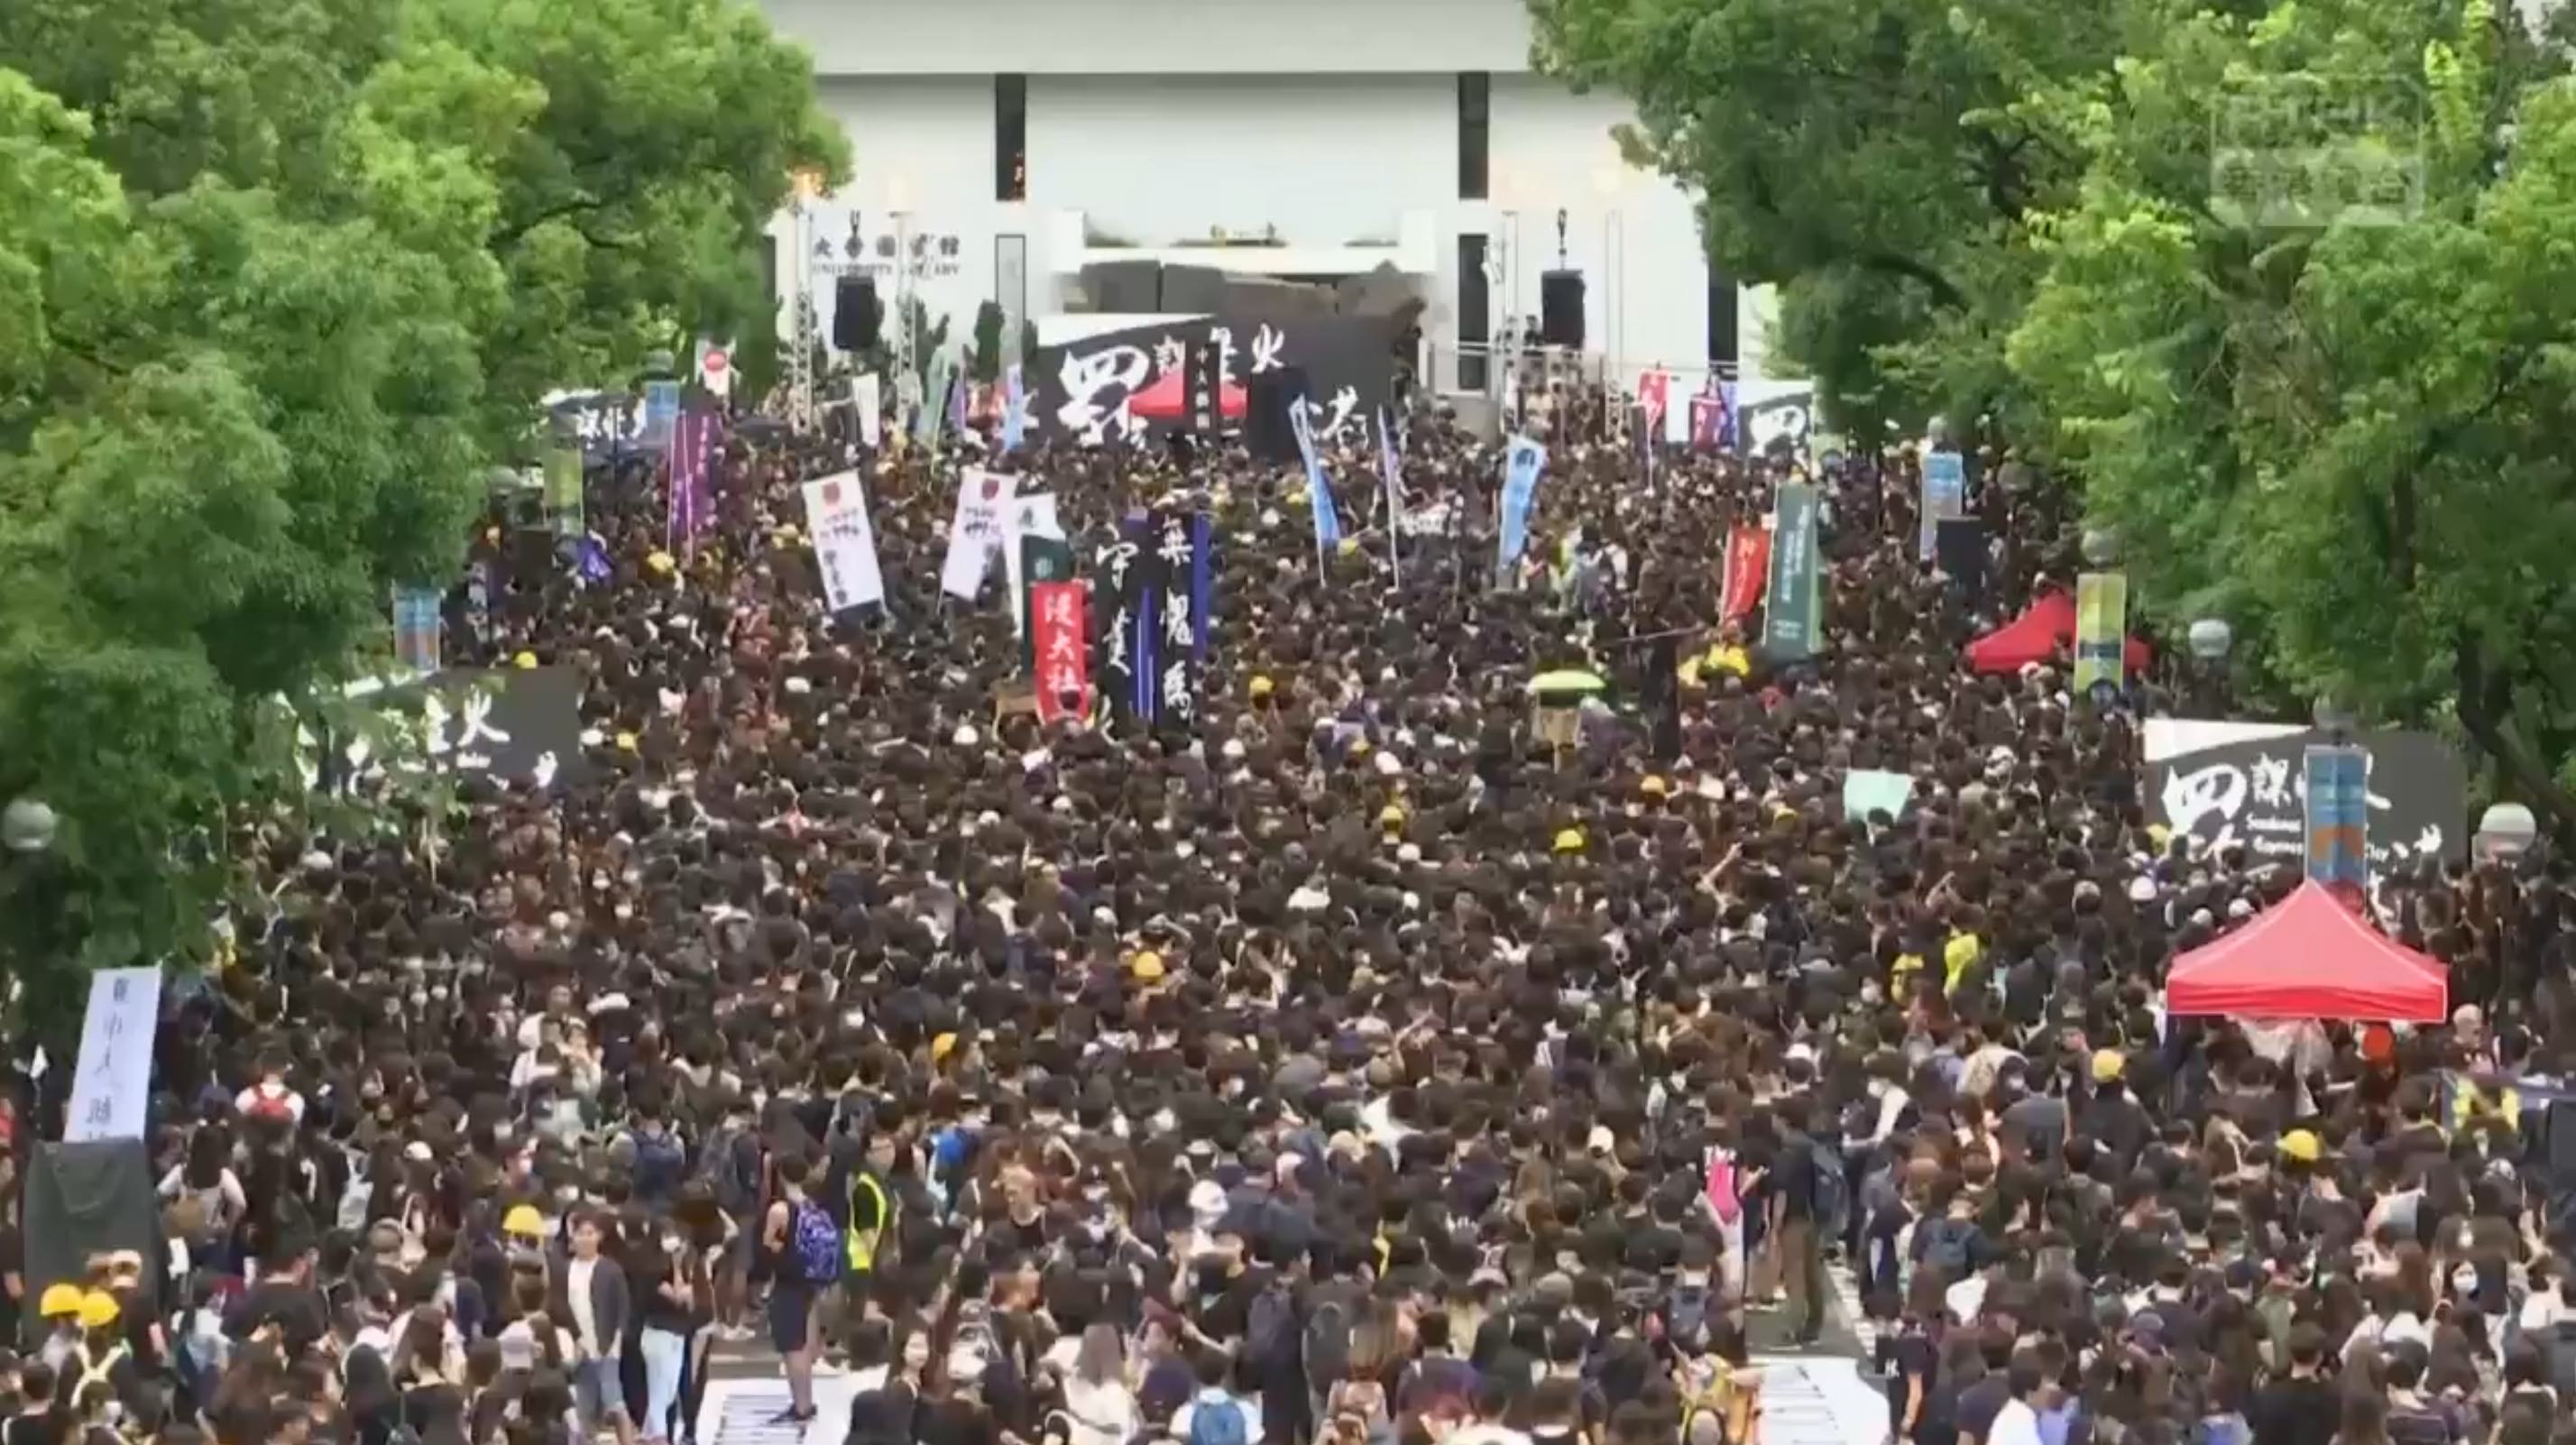 Students gather today as part of a class boycott at the Chinese University of Hong Kong. Screengrab via Facebook/RTHK.